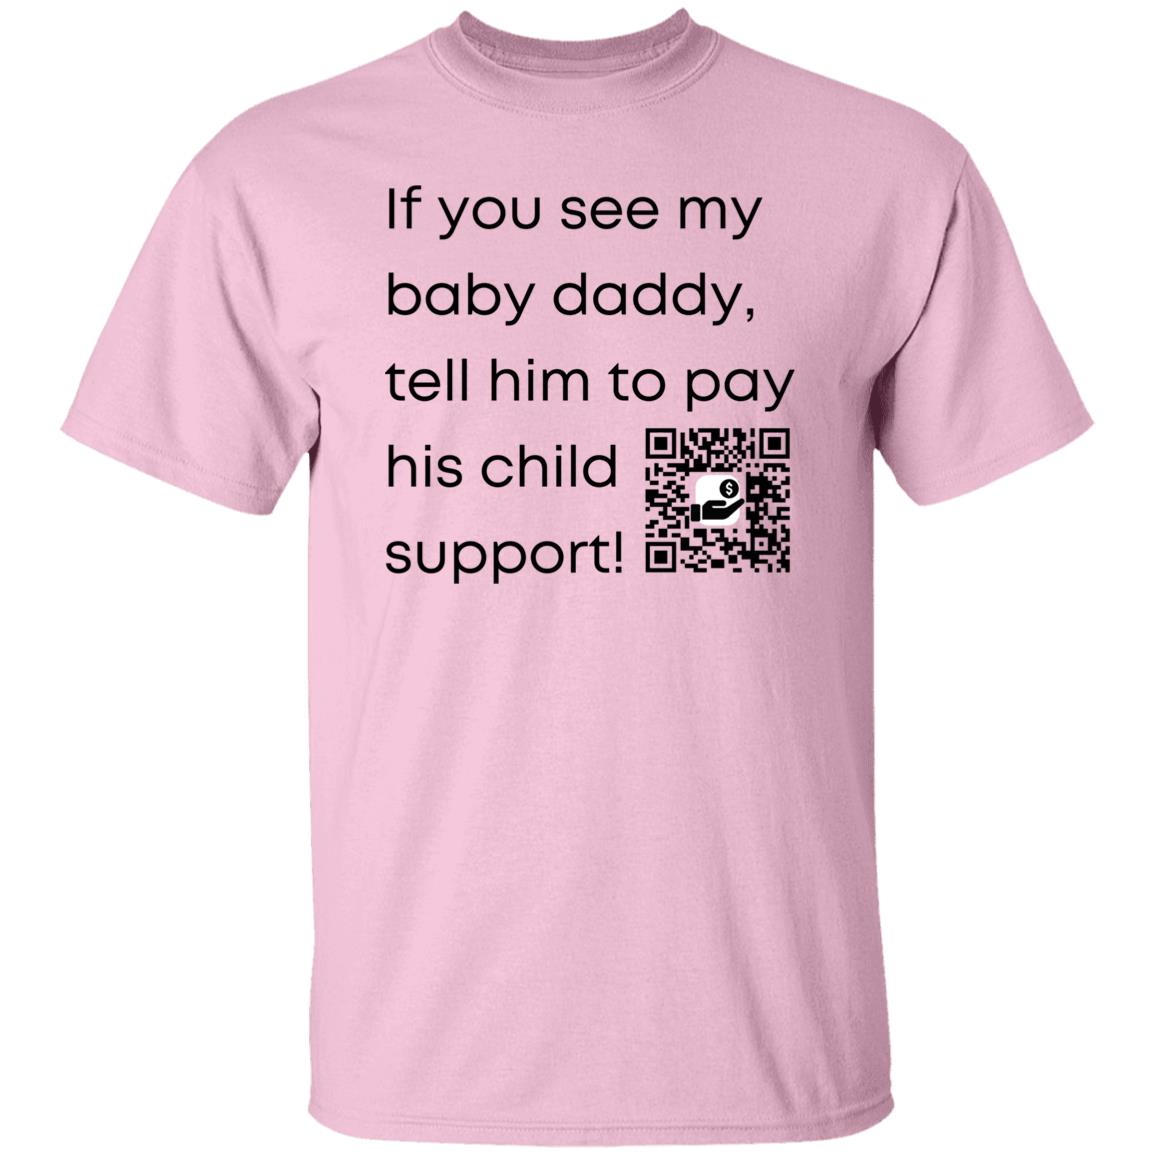 Pay Child Support (baby daddy) G500 5.3 oz. T-Shirt